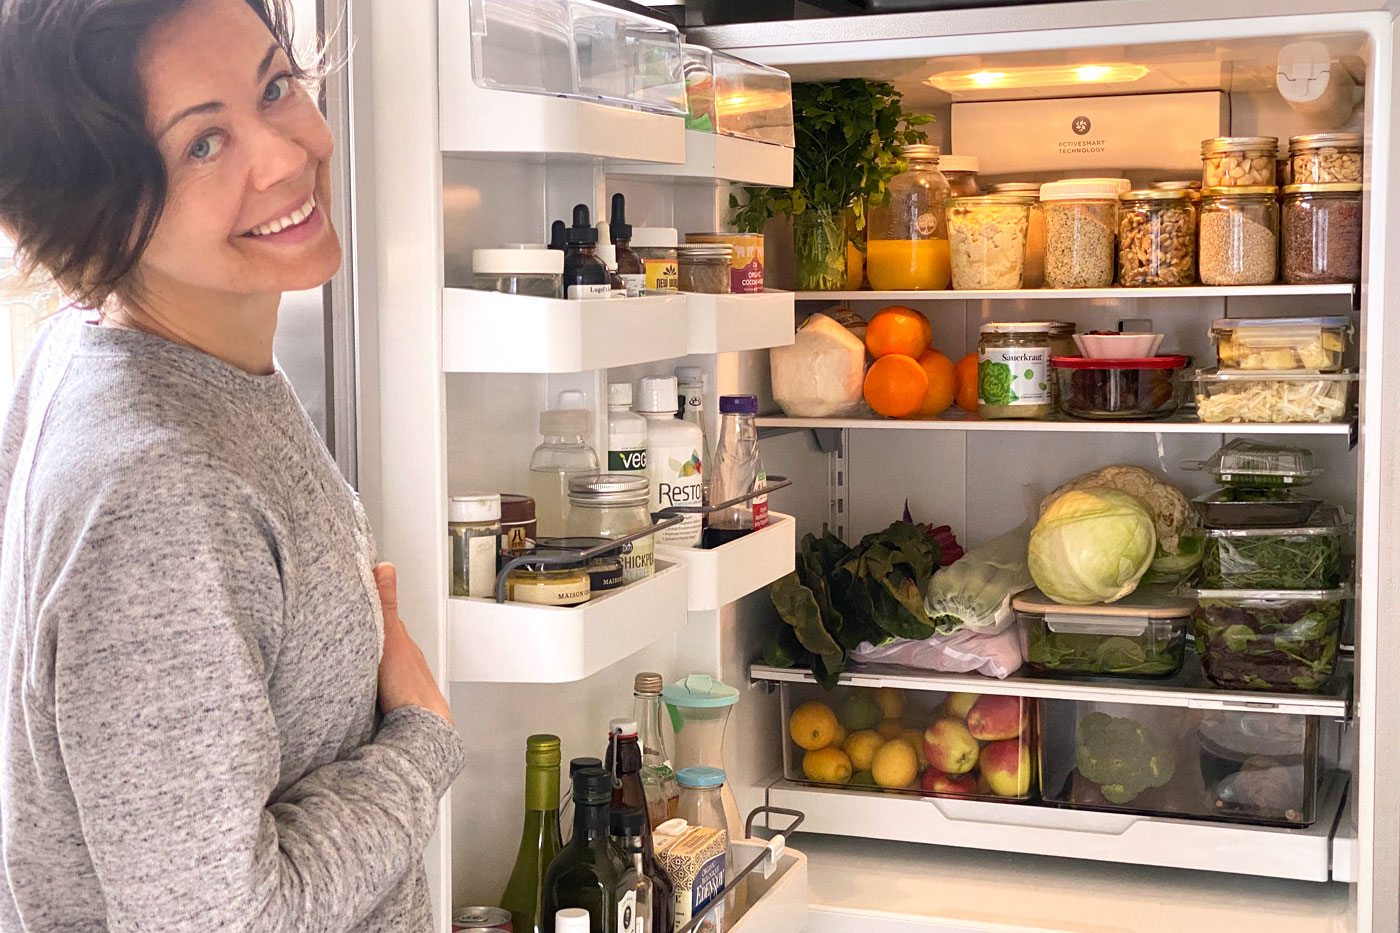 How to prepare your fridge for self-isolation